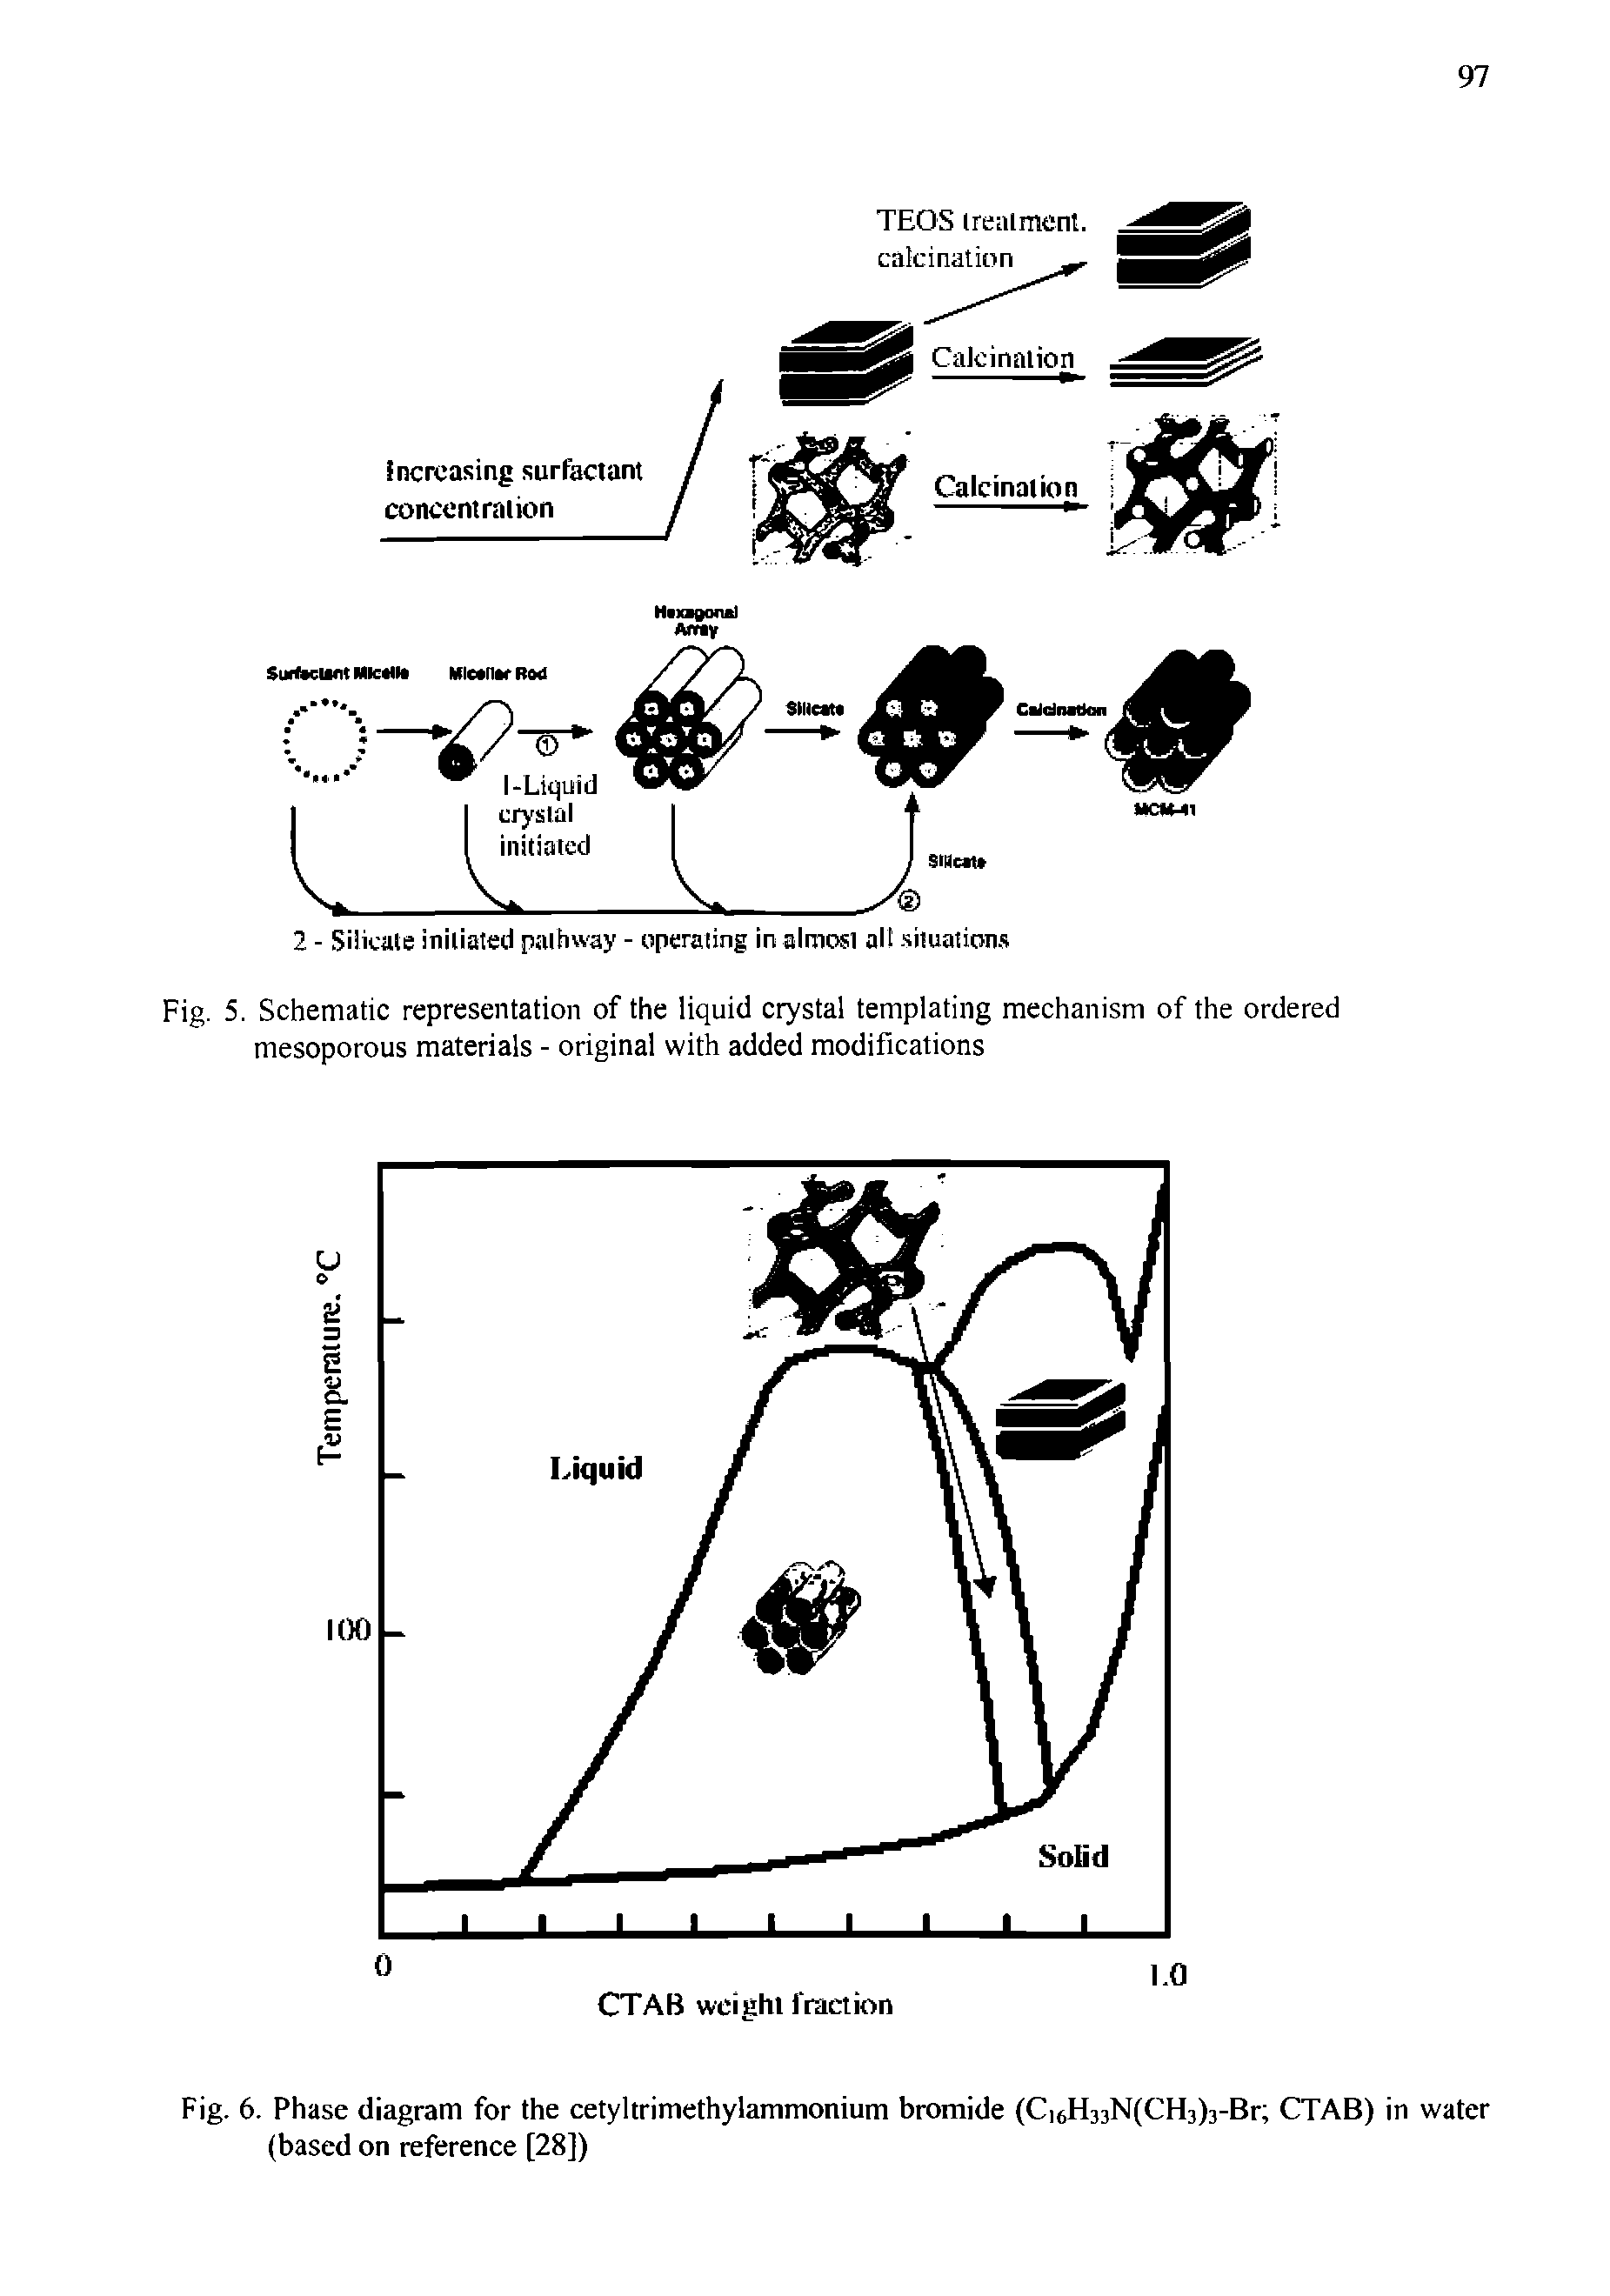 Fig. 5. Schematic representation of the liquid crystal templating mechanism of the ordered mesoporous materials - original with added modifications...